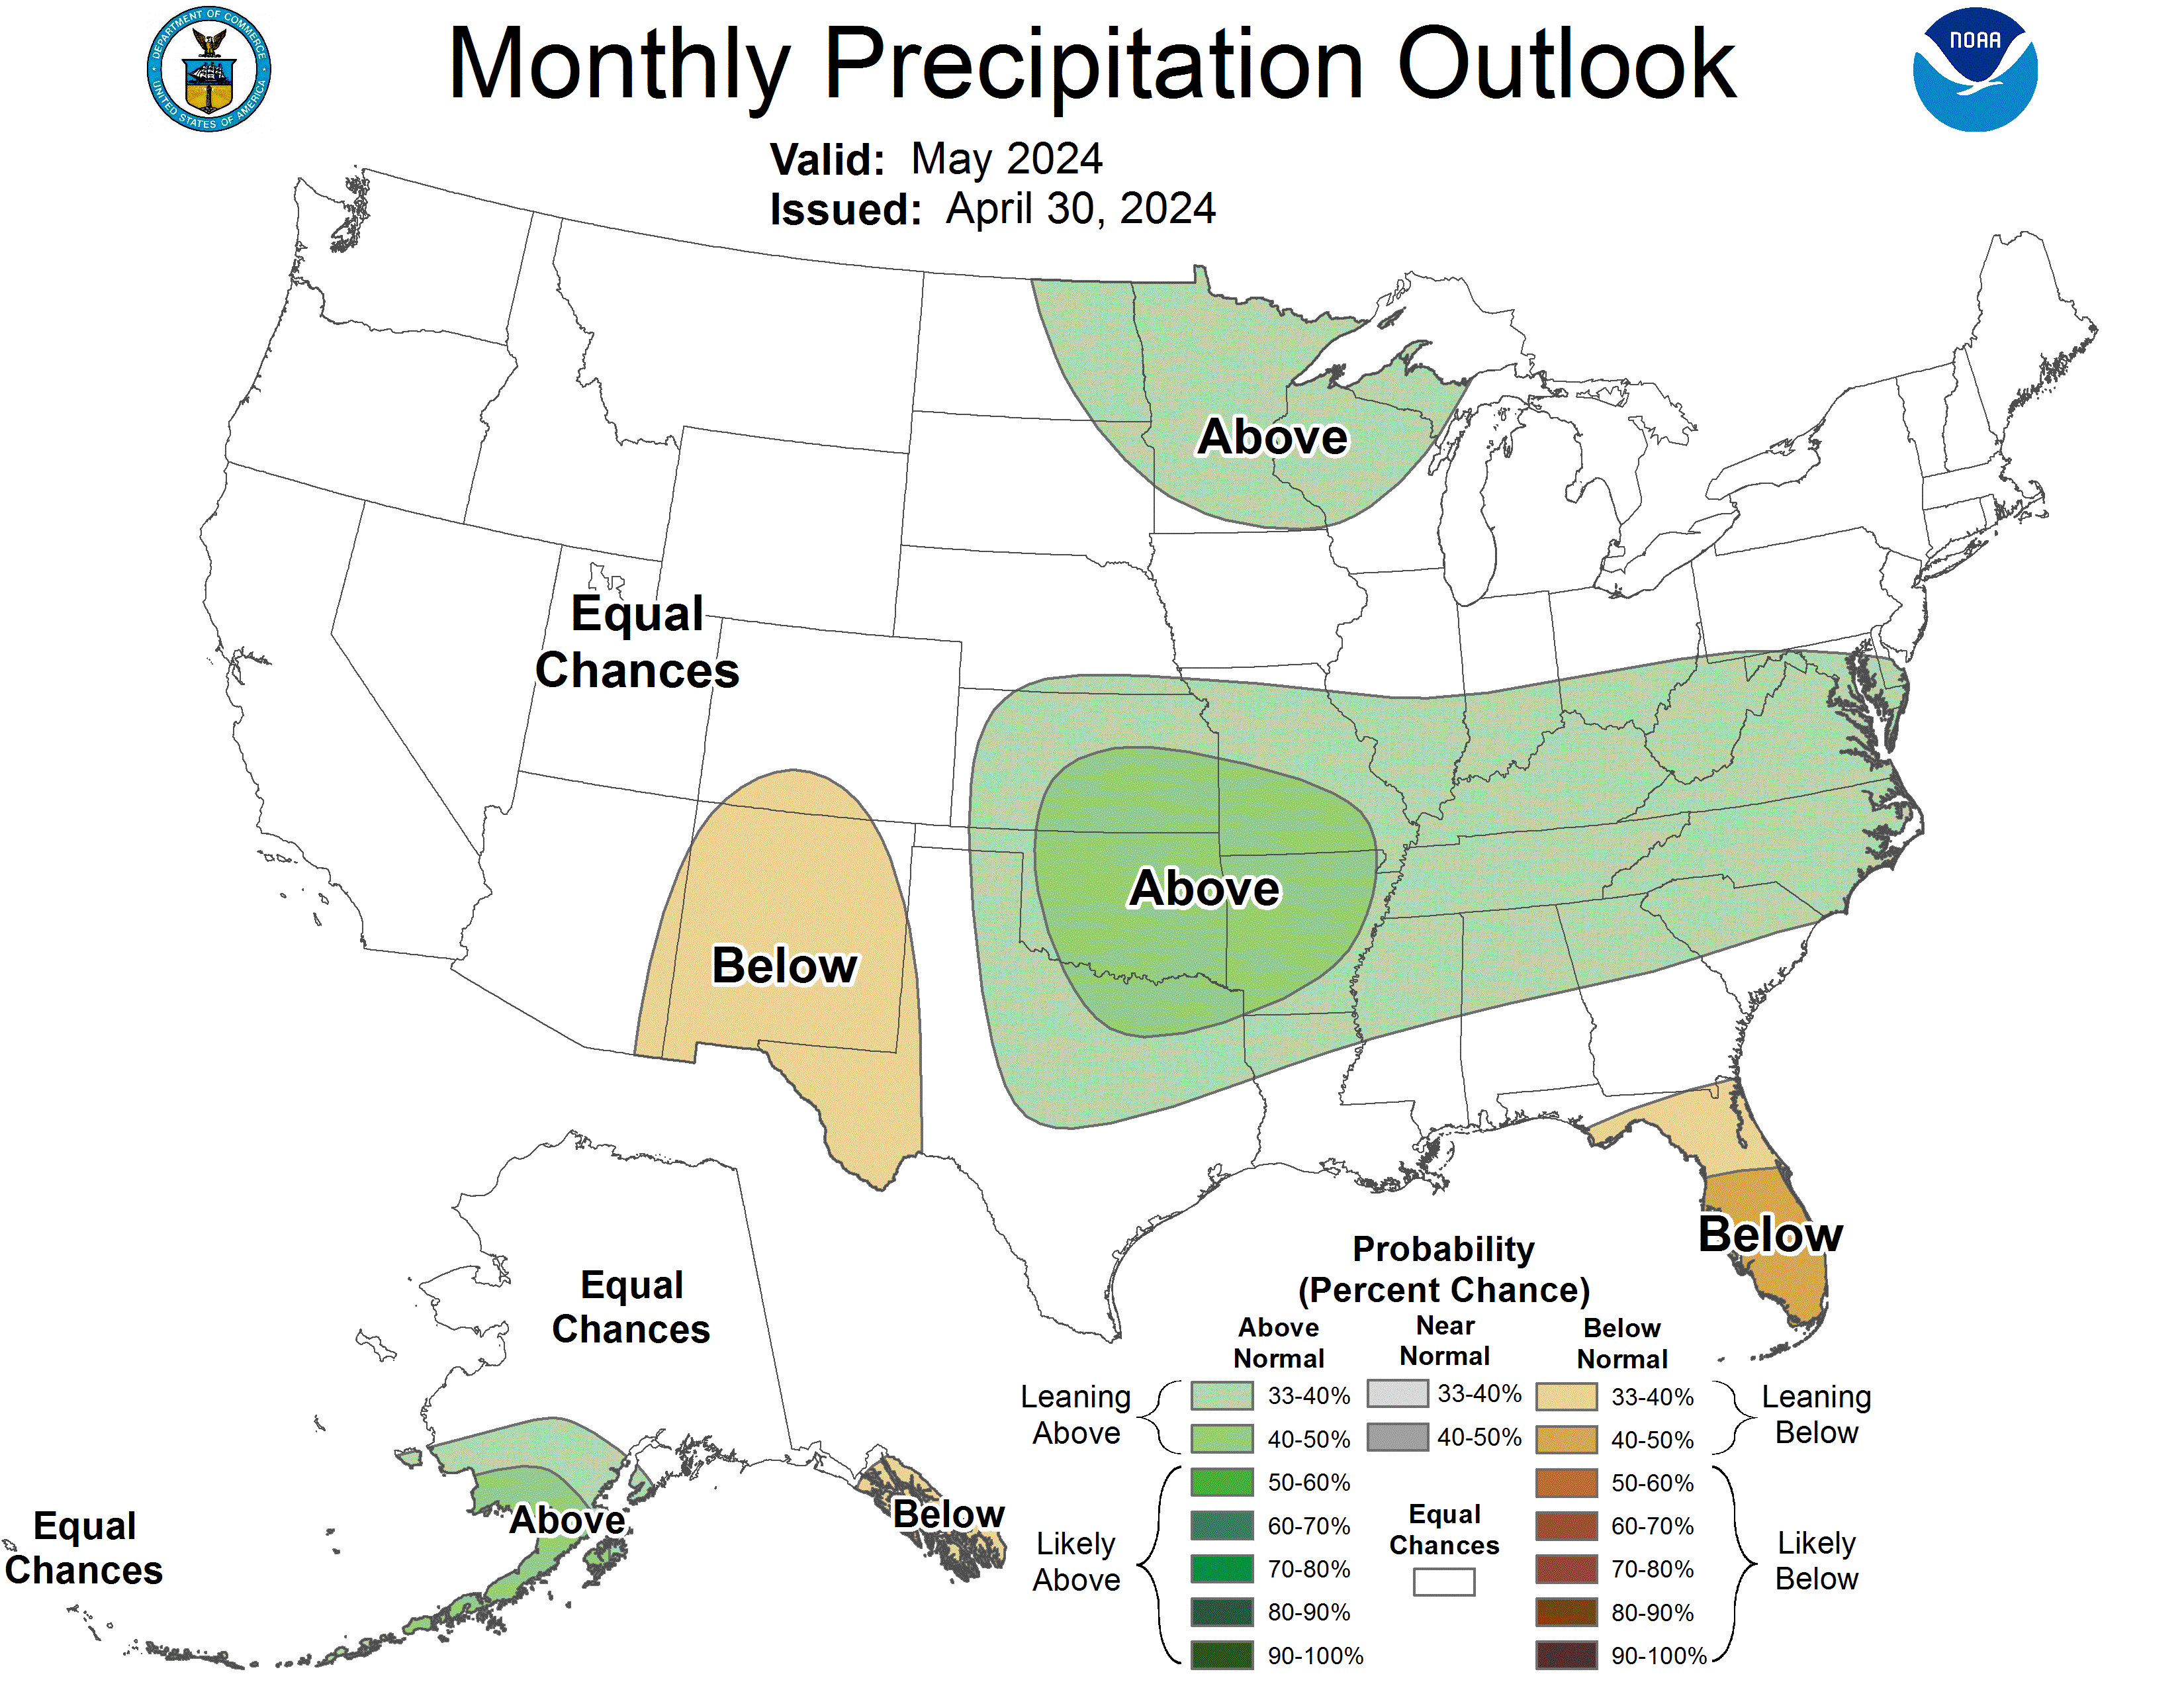 https://www.cpc.ncep.noaa.gov/products/predictions/long_range/lead14/off15_prcp.gif